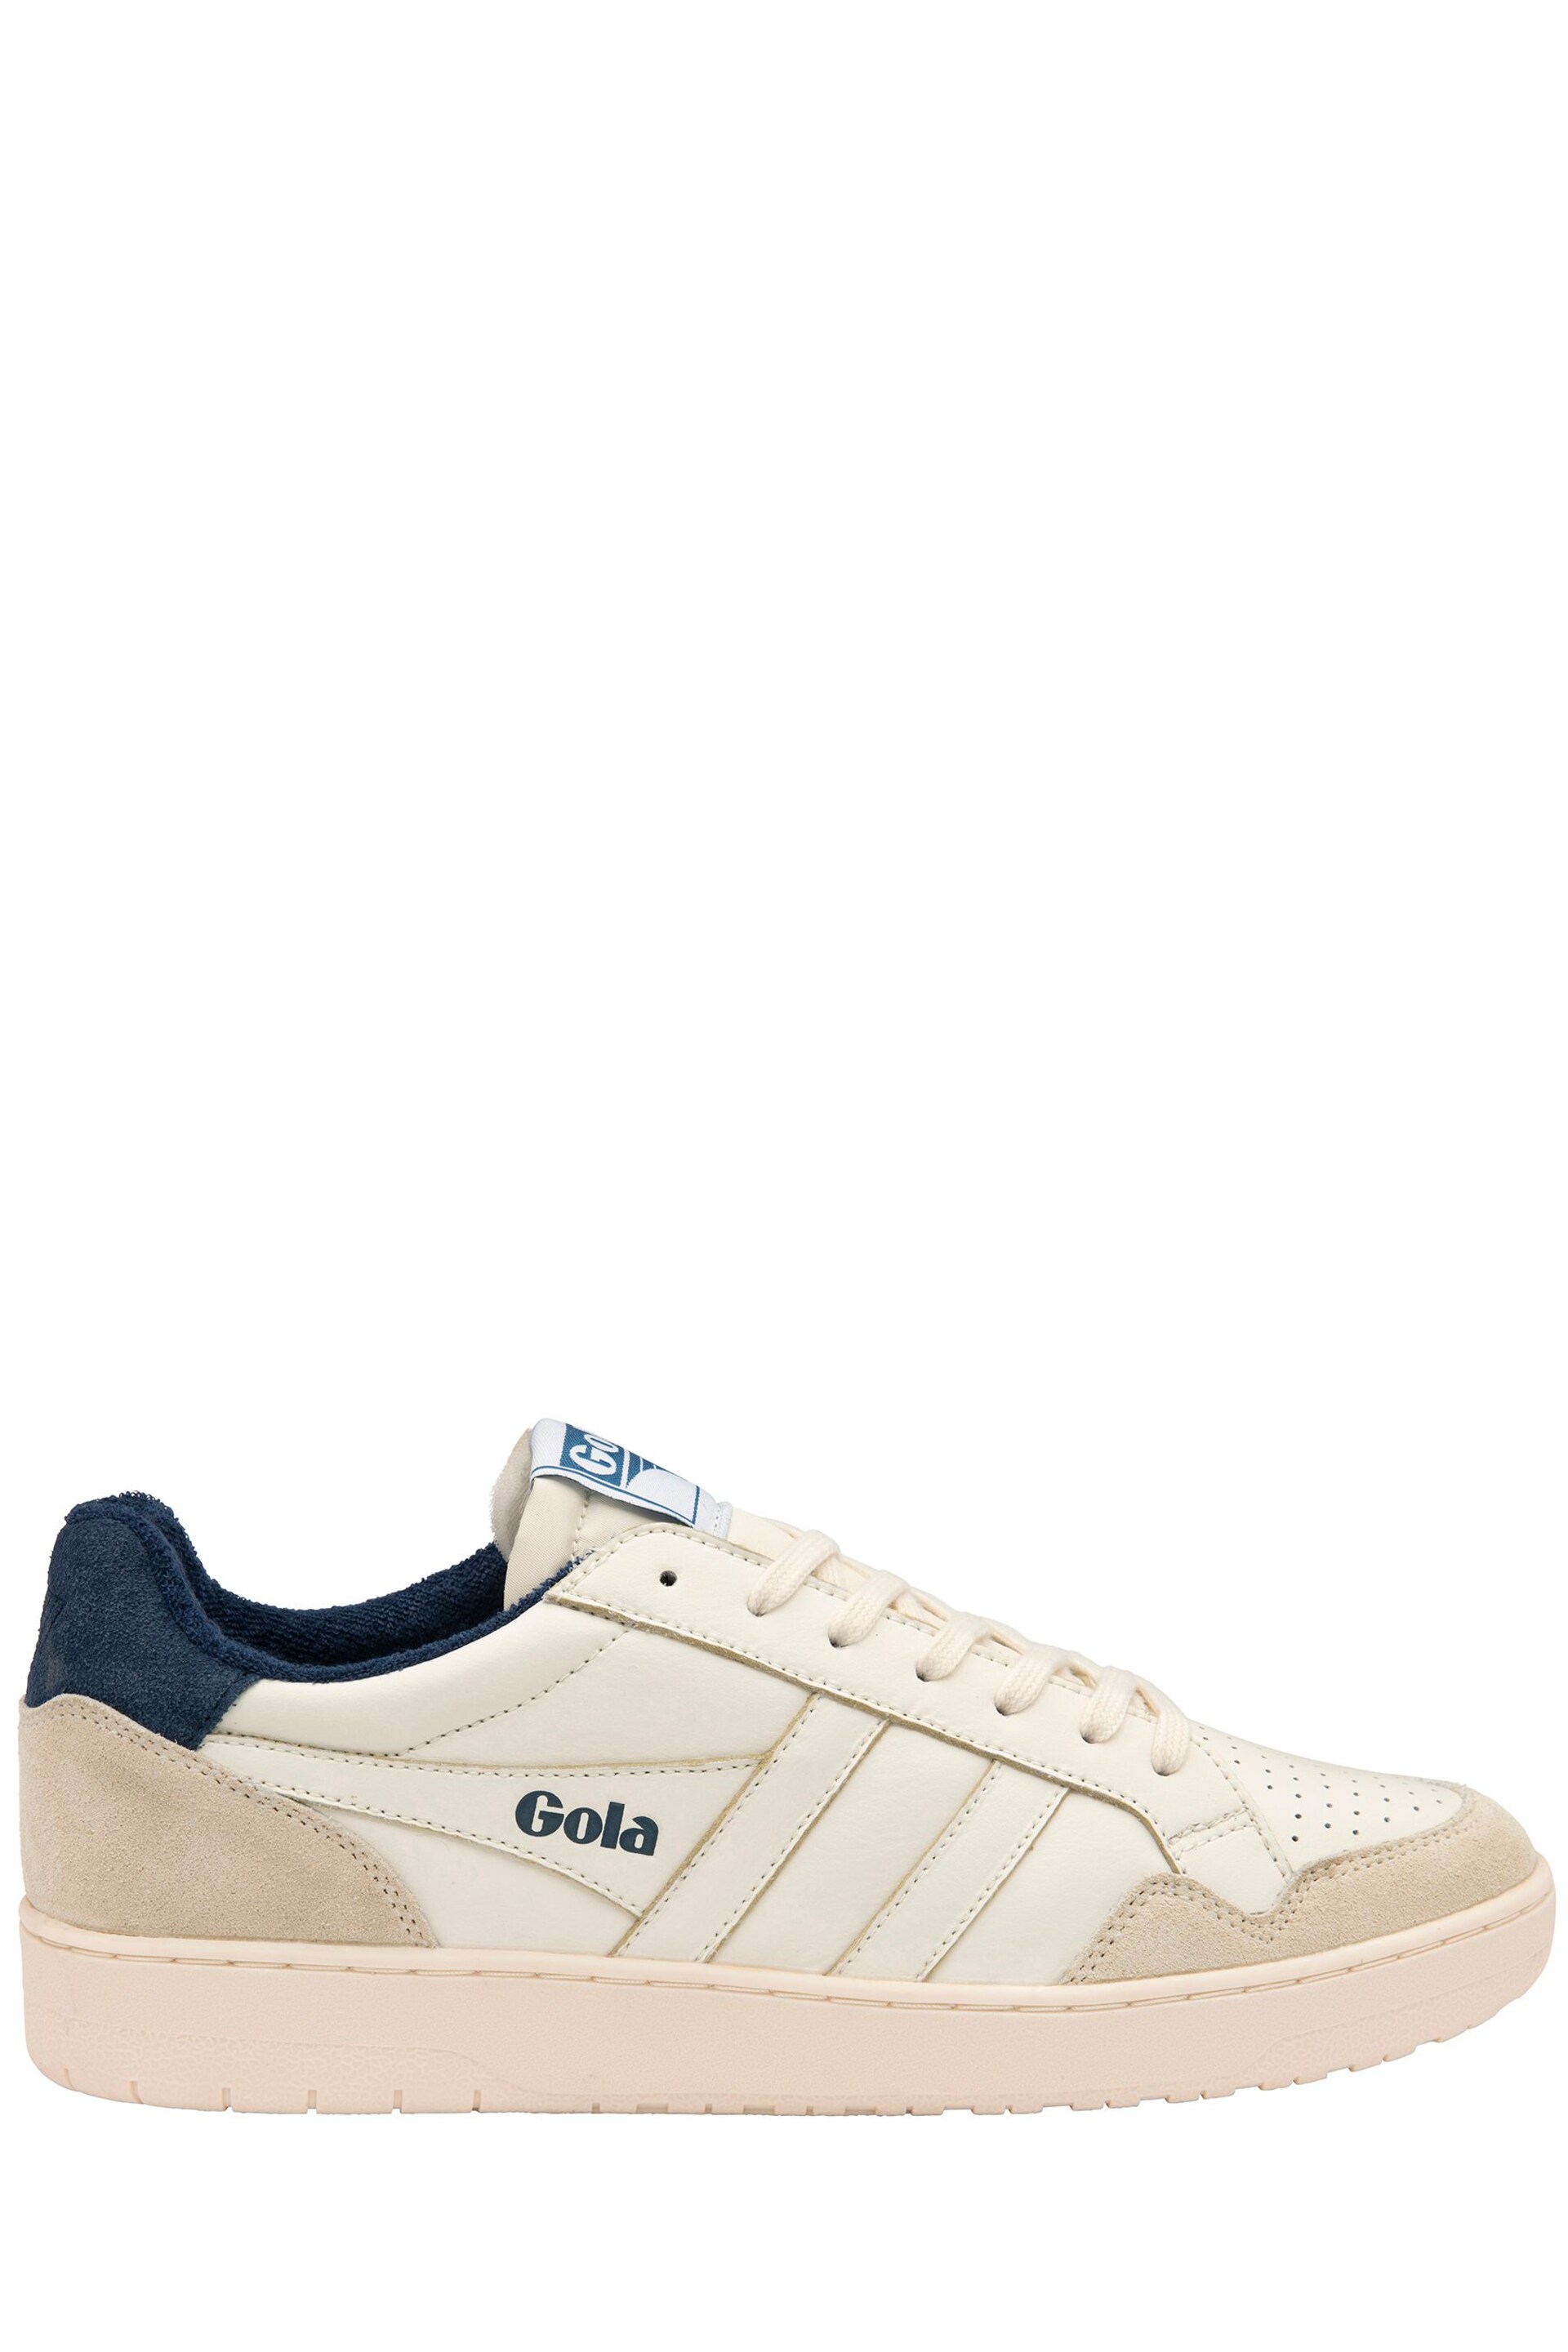 Gola Salt White Mens  Eagle Leather Lace-Up Trainers - Image 1 of 1